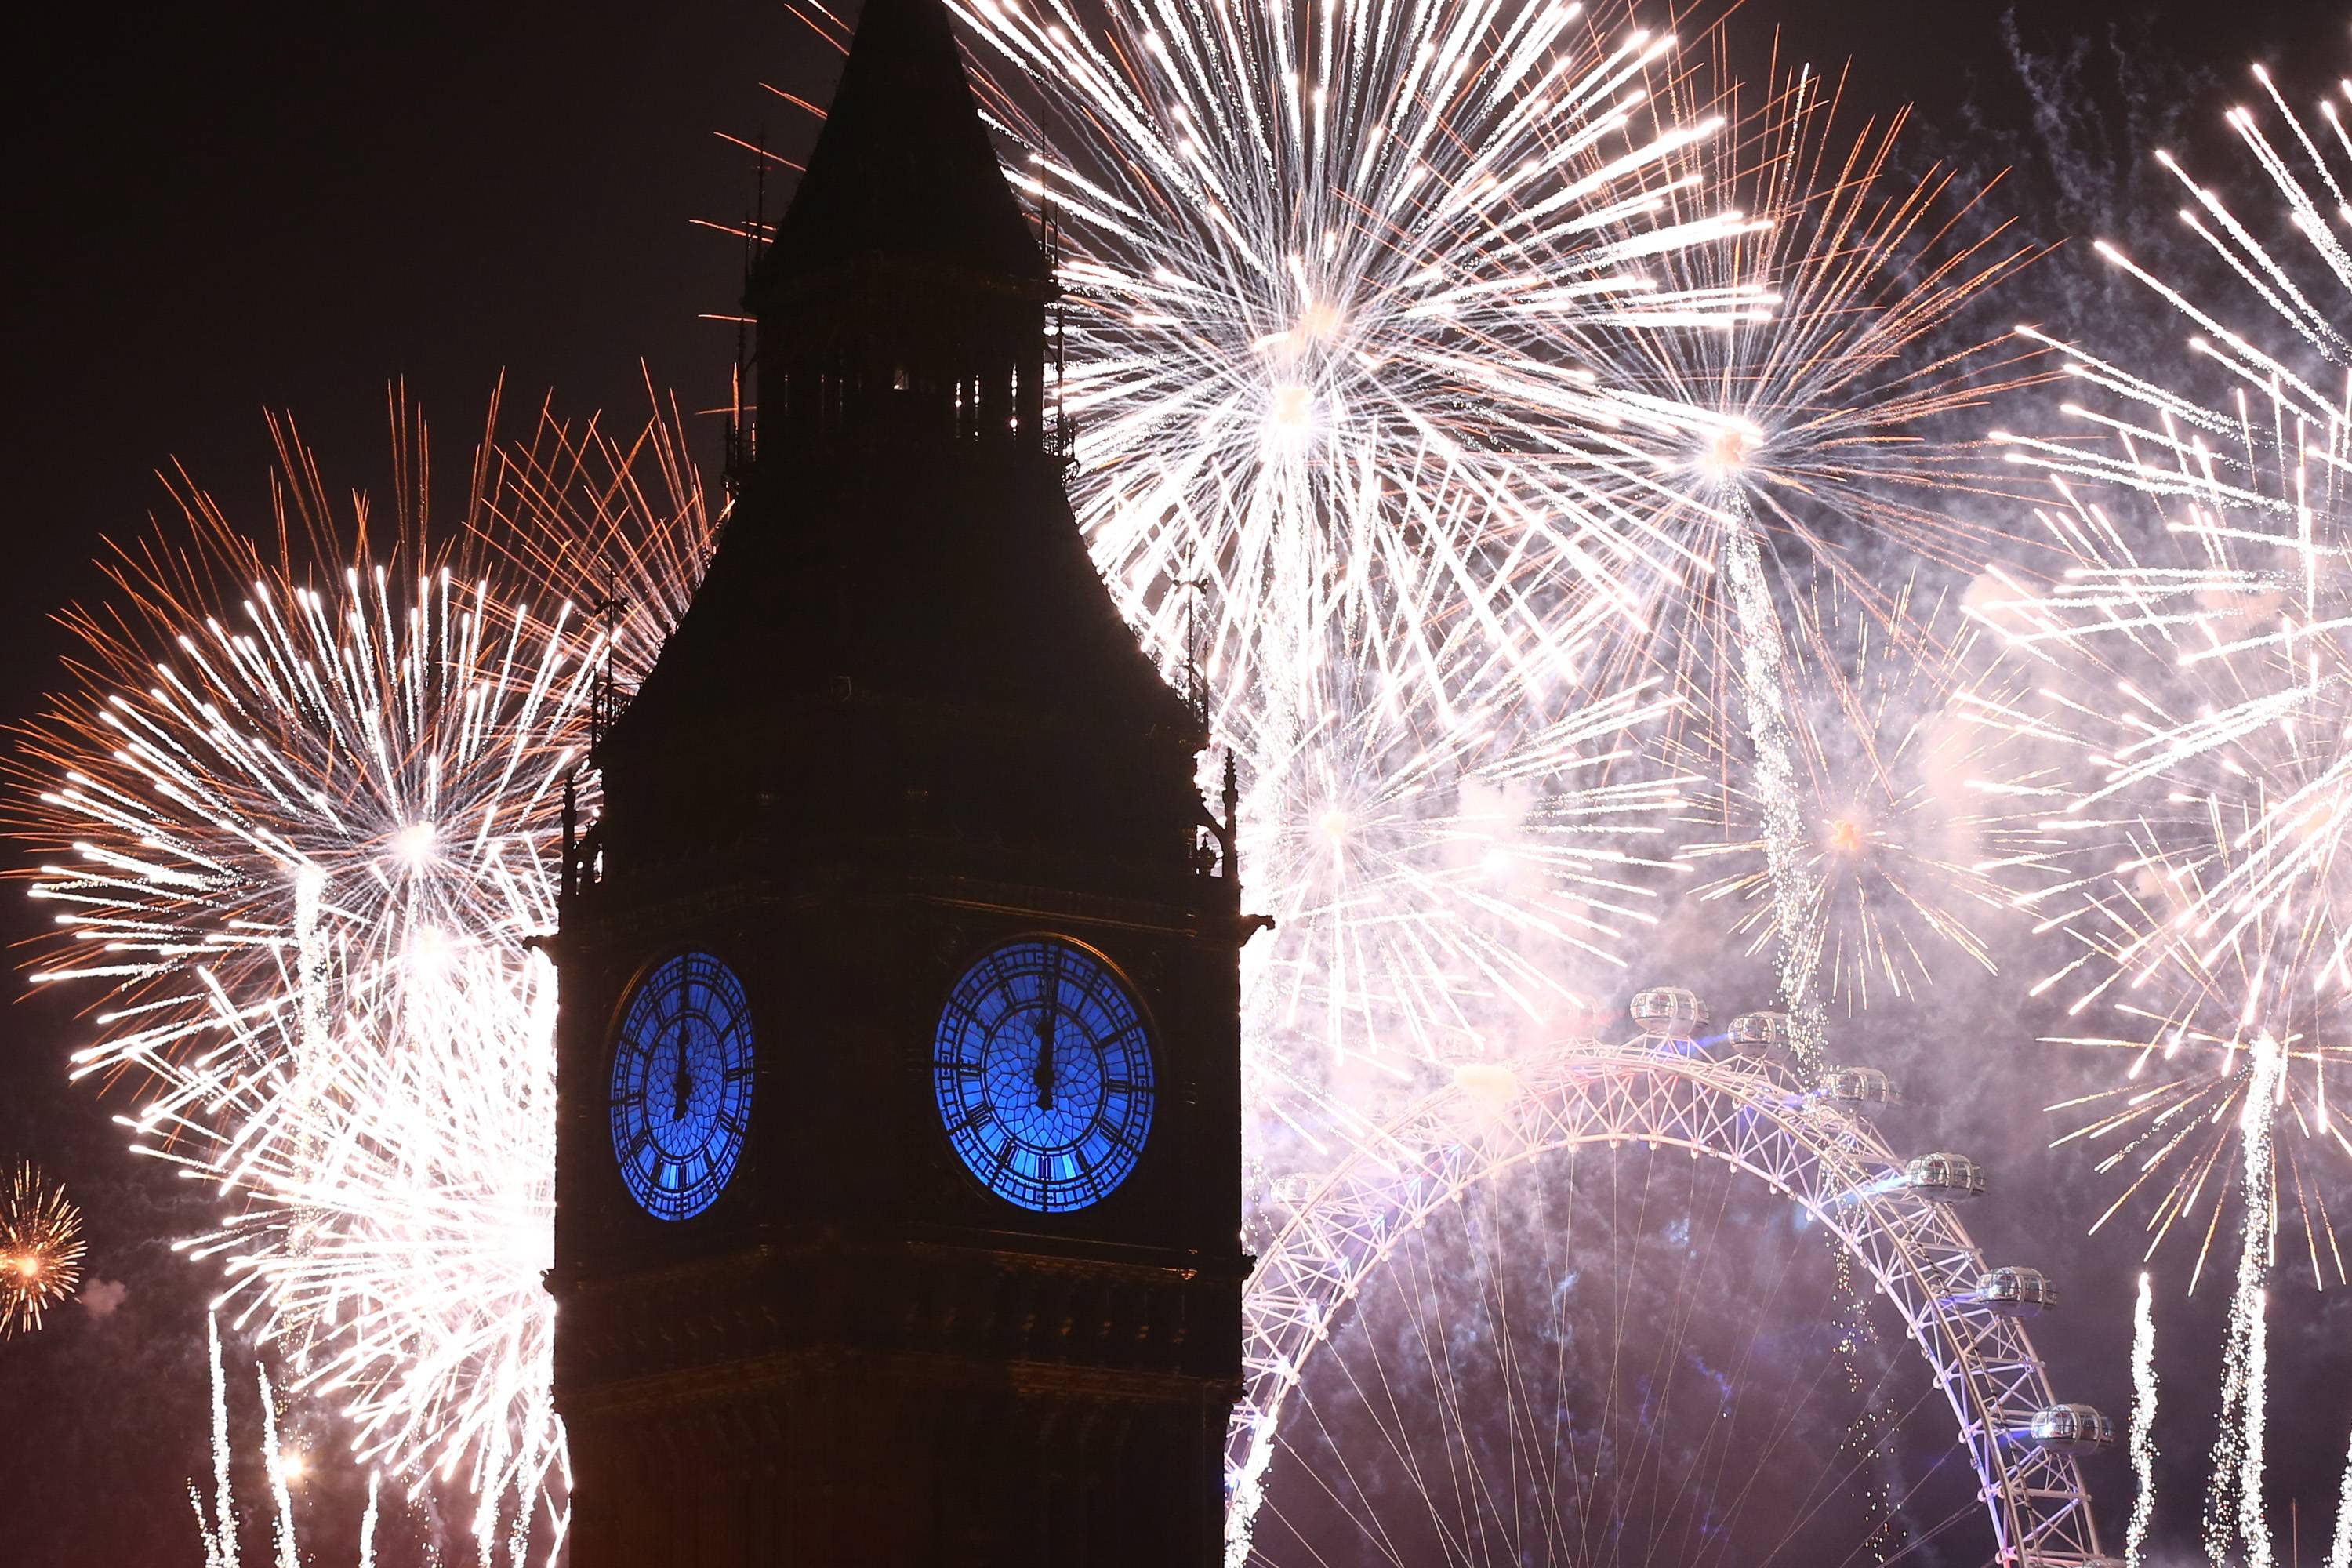 New Year's Eve welcomed in London.